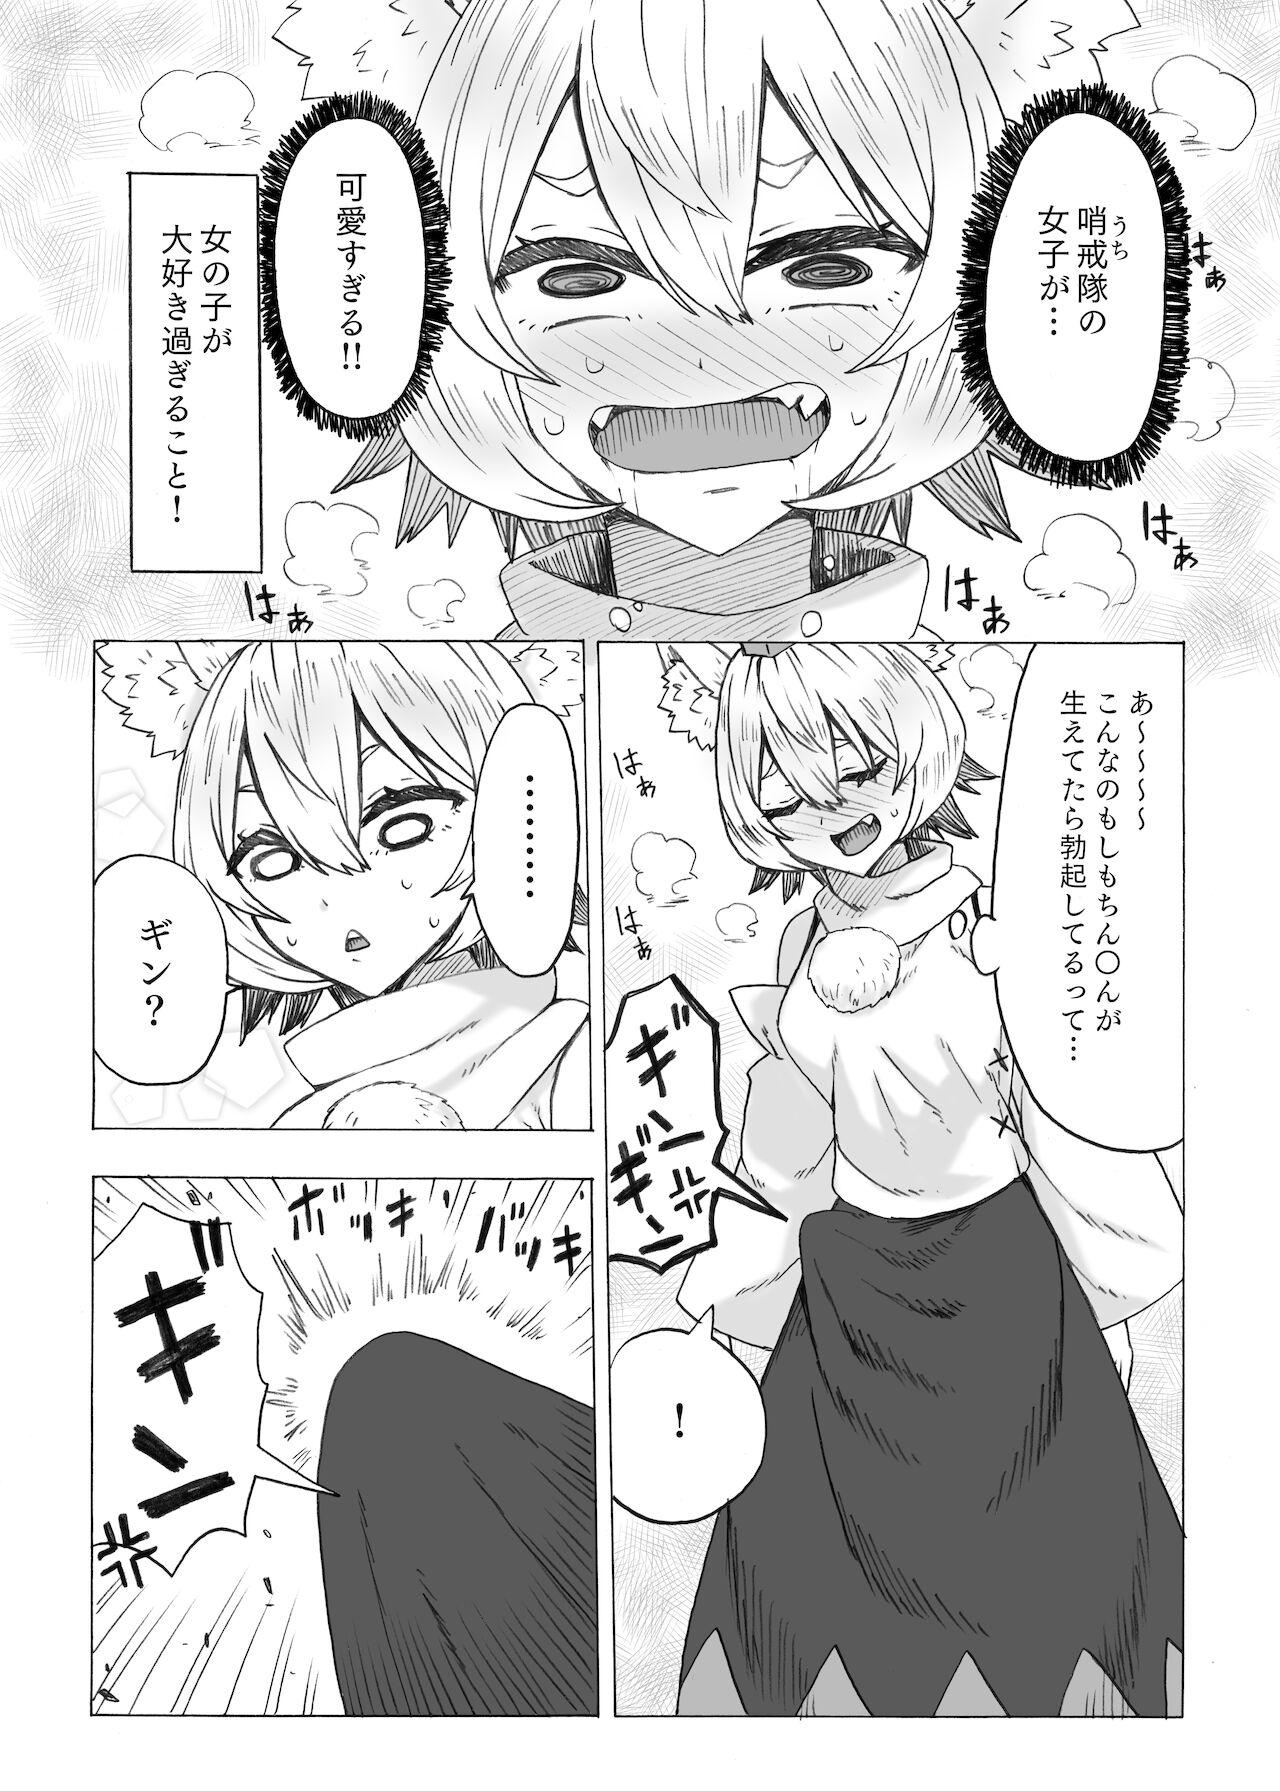 Asiansex ふた椛がふたりに搾り尽くされる話 - Touhou project Celebrity - Page 4